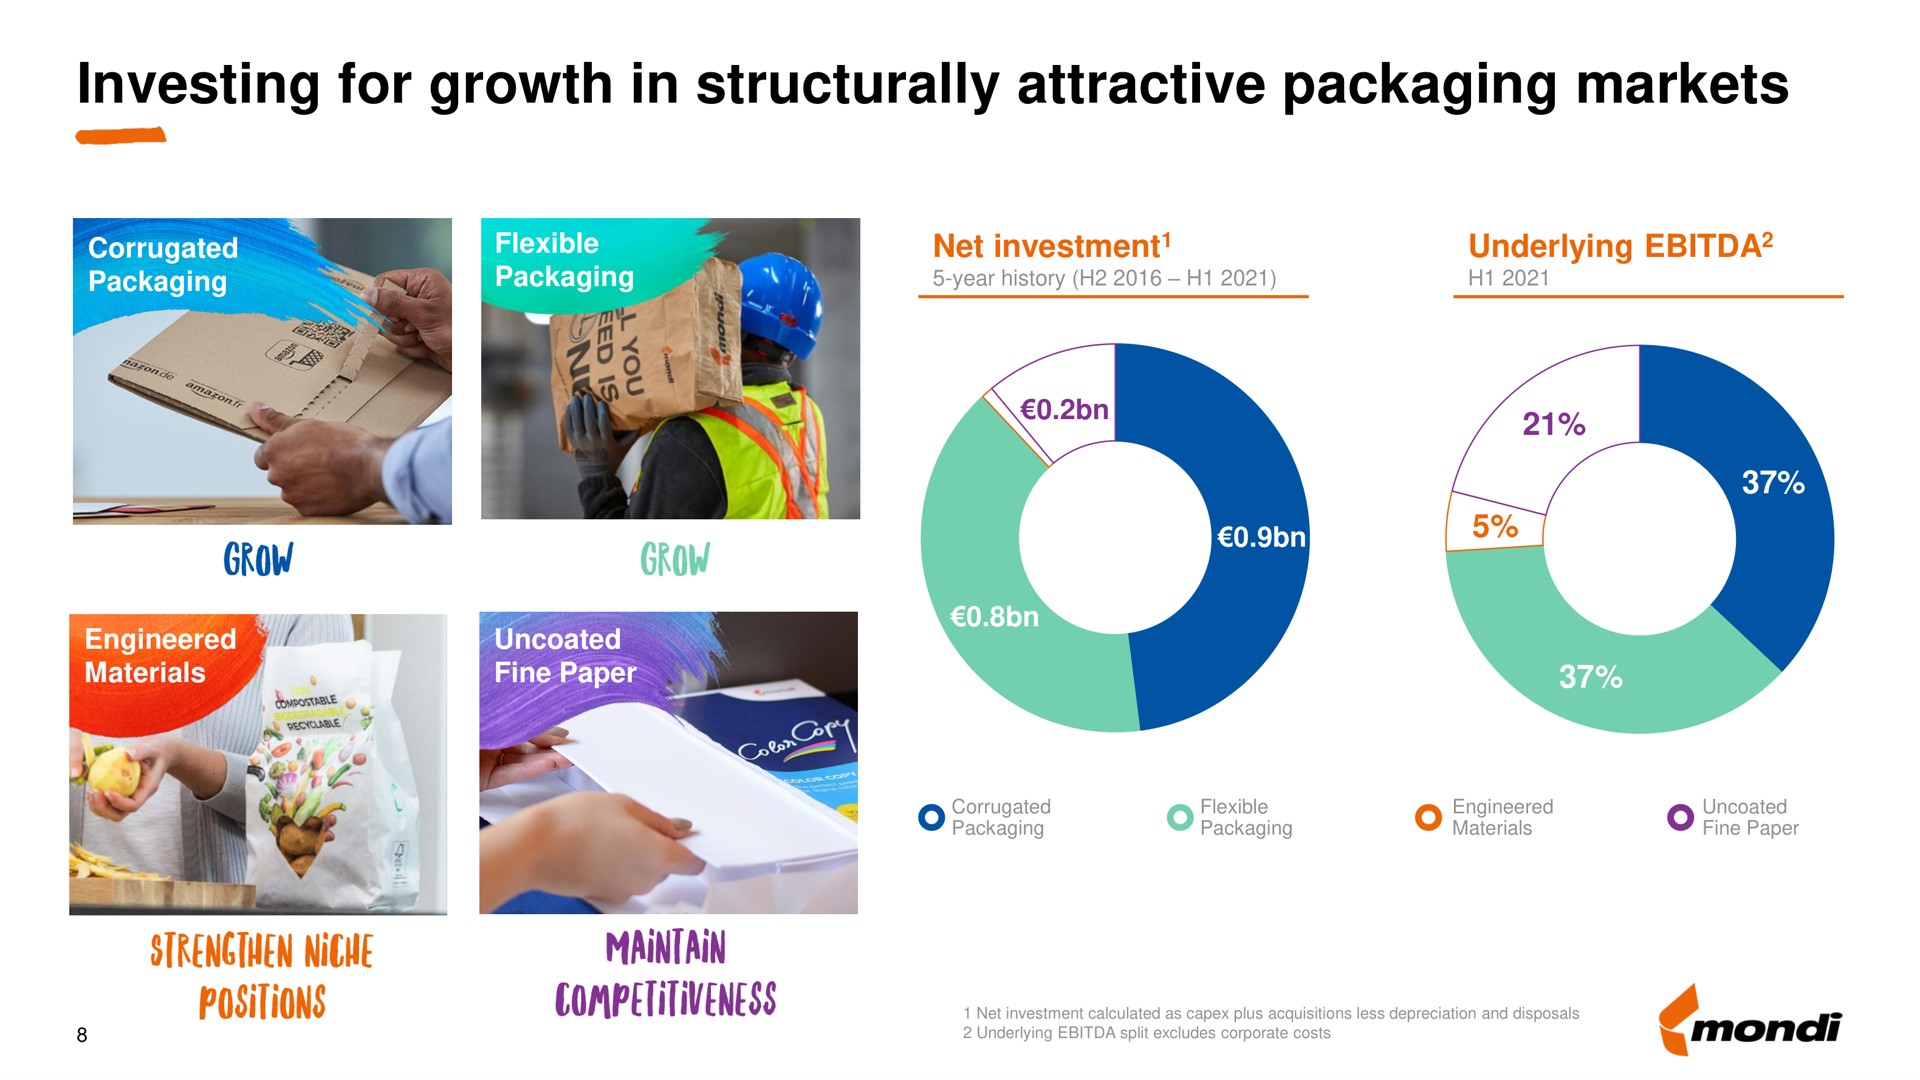 investing for growth in structurally attractive packaging markets strengthen niche positions maintain competitiveness | Mondi